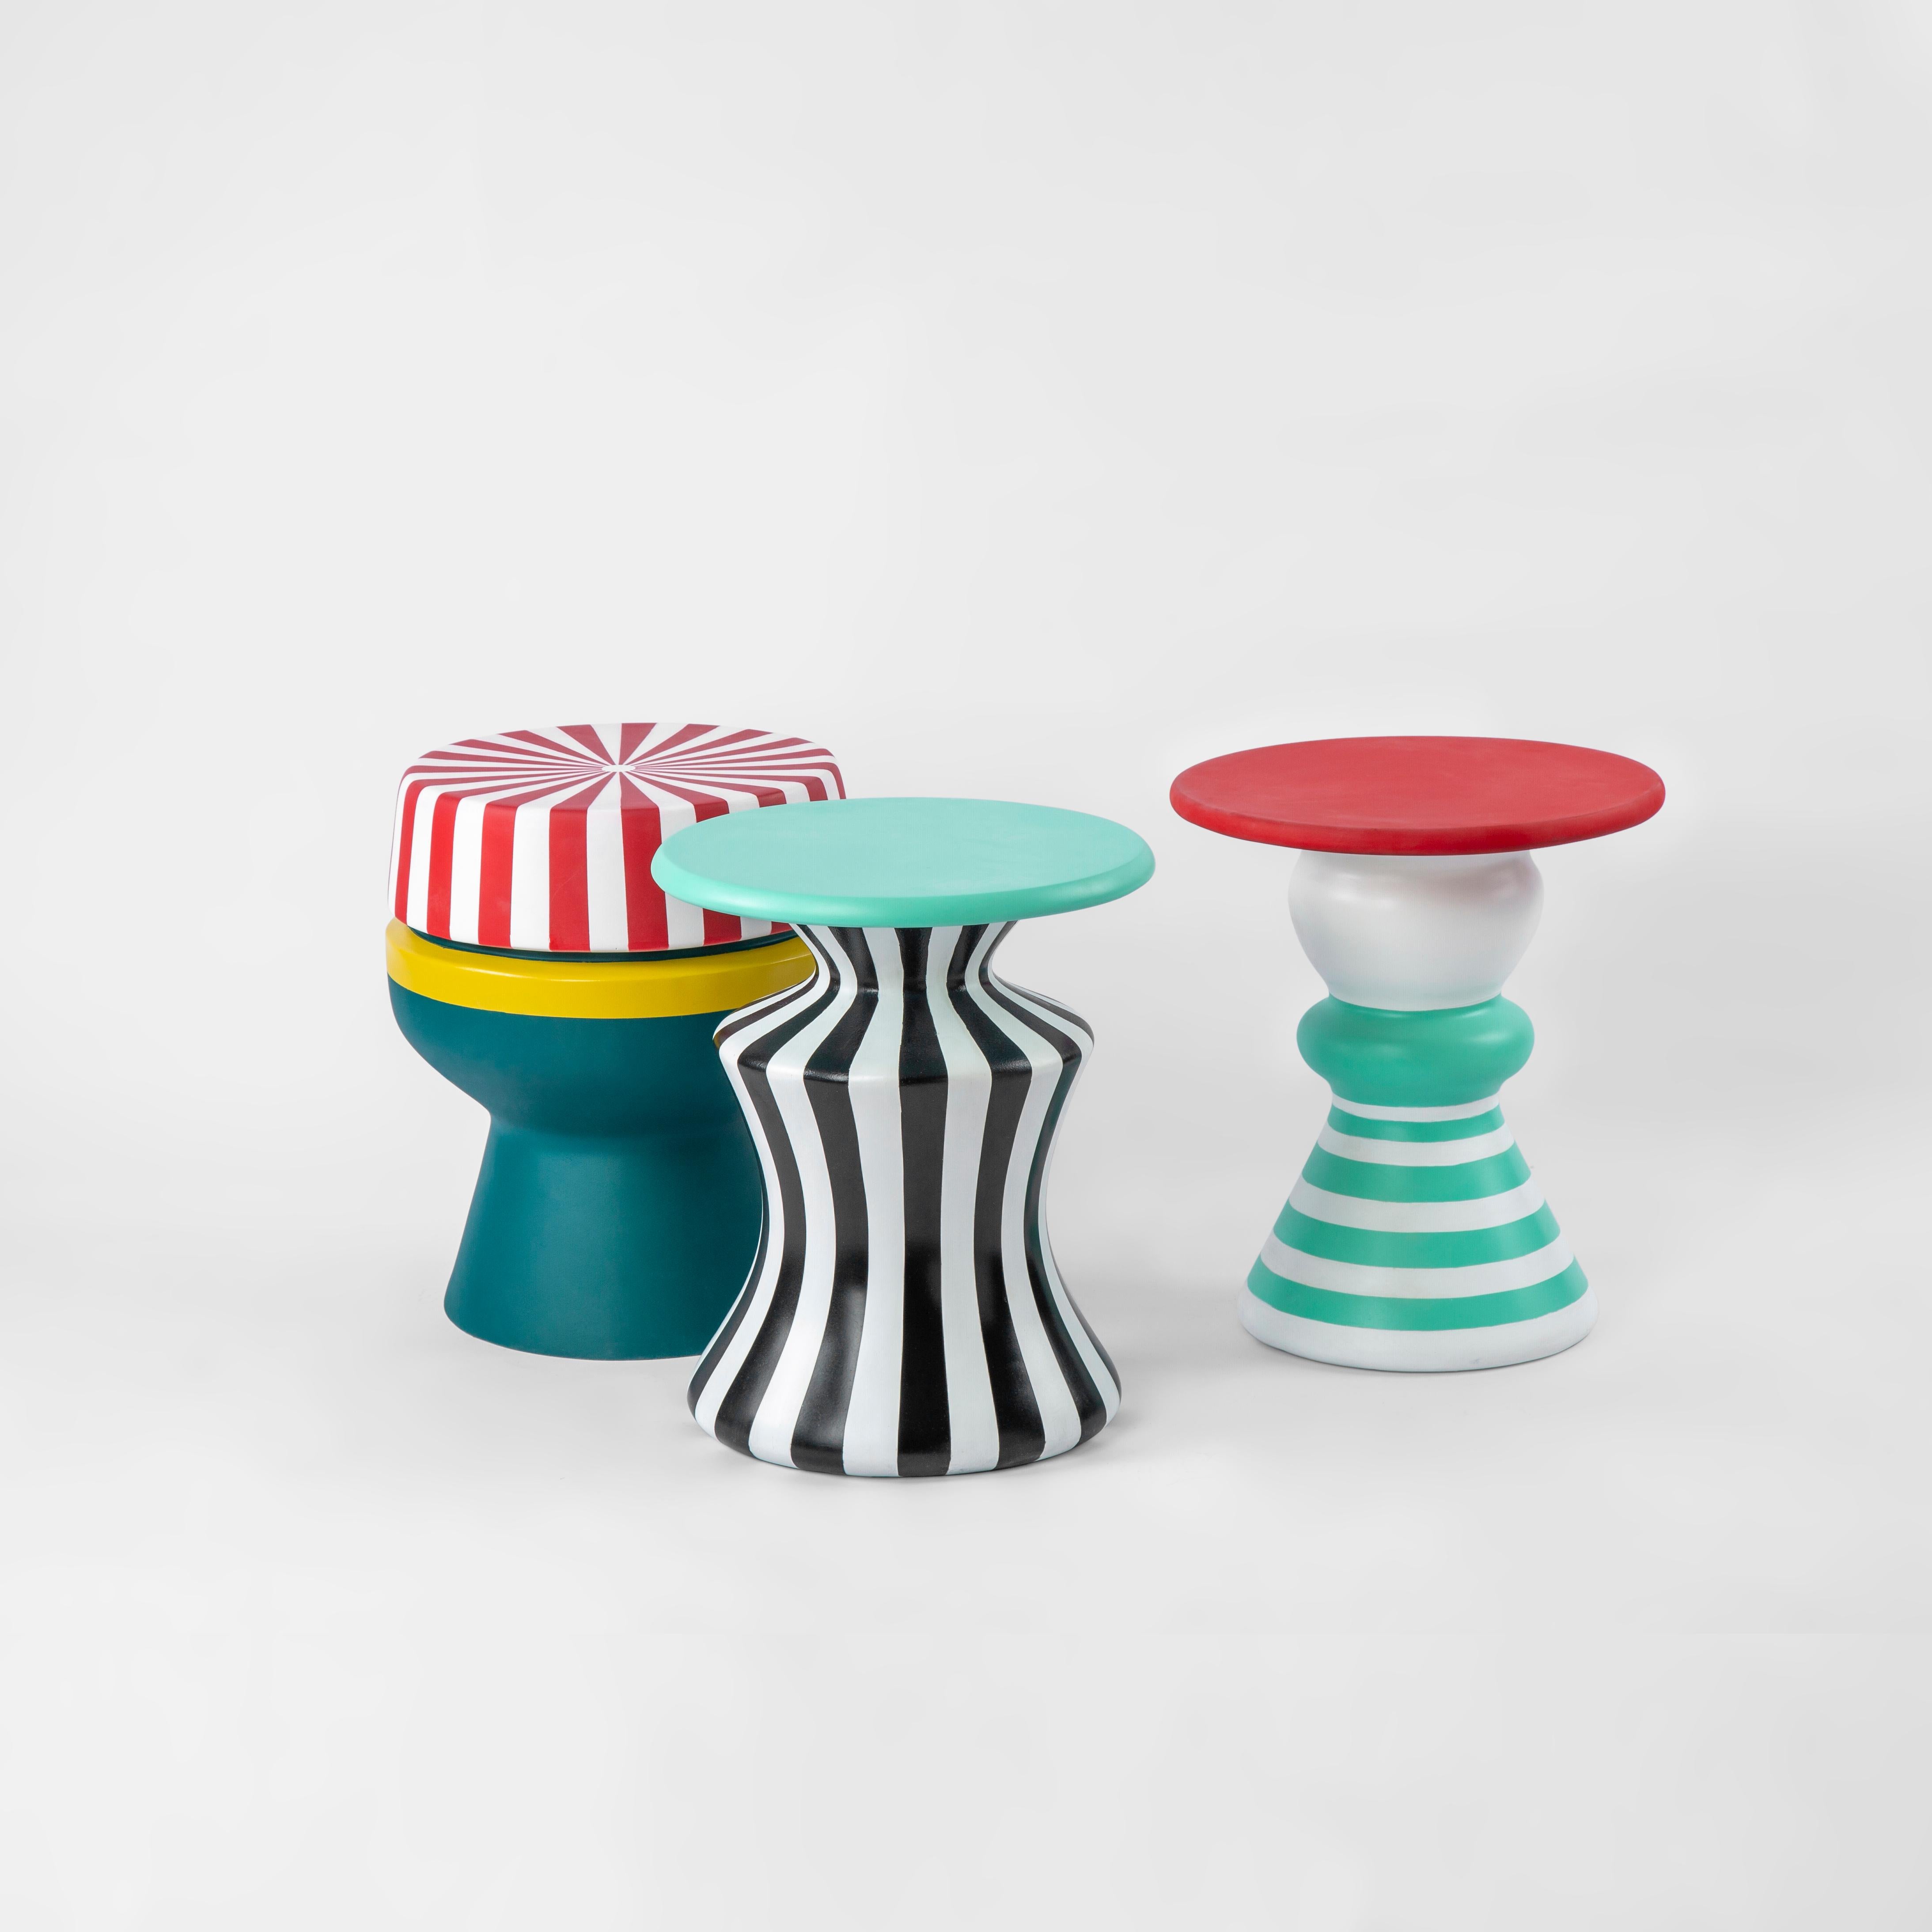 Colorful weather-resistant fiberglass outdoor side table - Nubian Mama Doll.

This family of stools and side tables are as quirky and whimsical as the characters found in Nubian fables and folklore. They come in a range of color patterns that